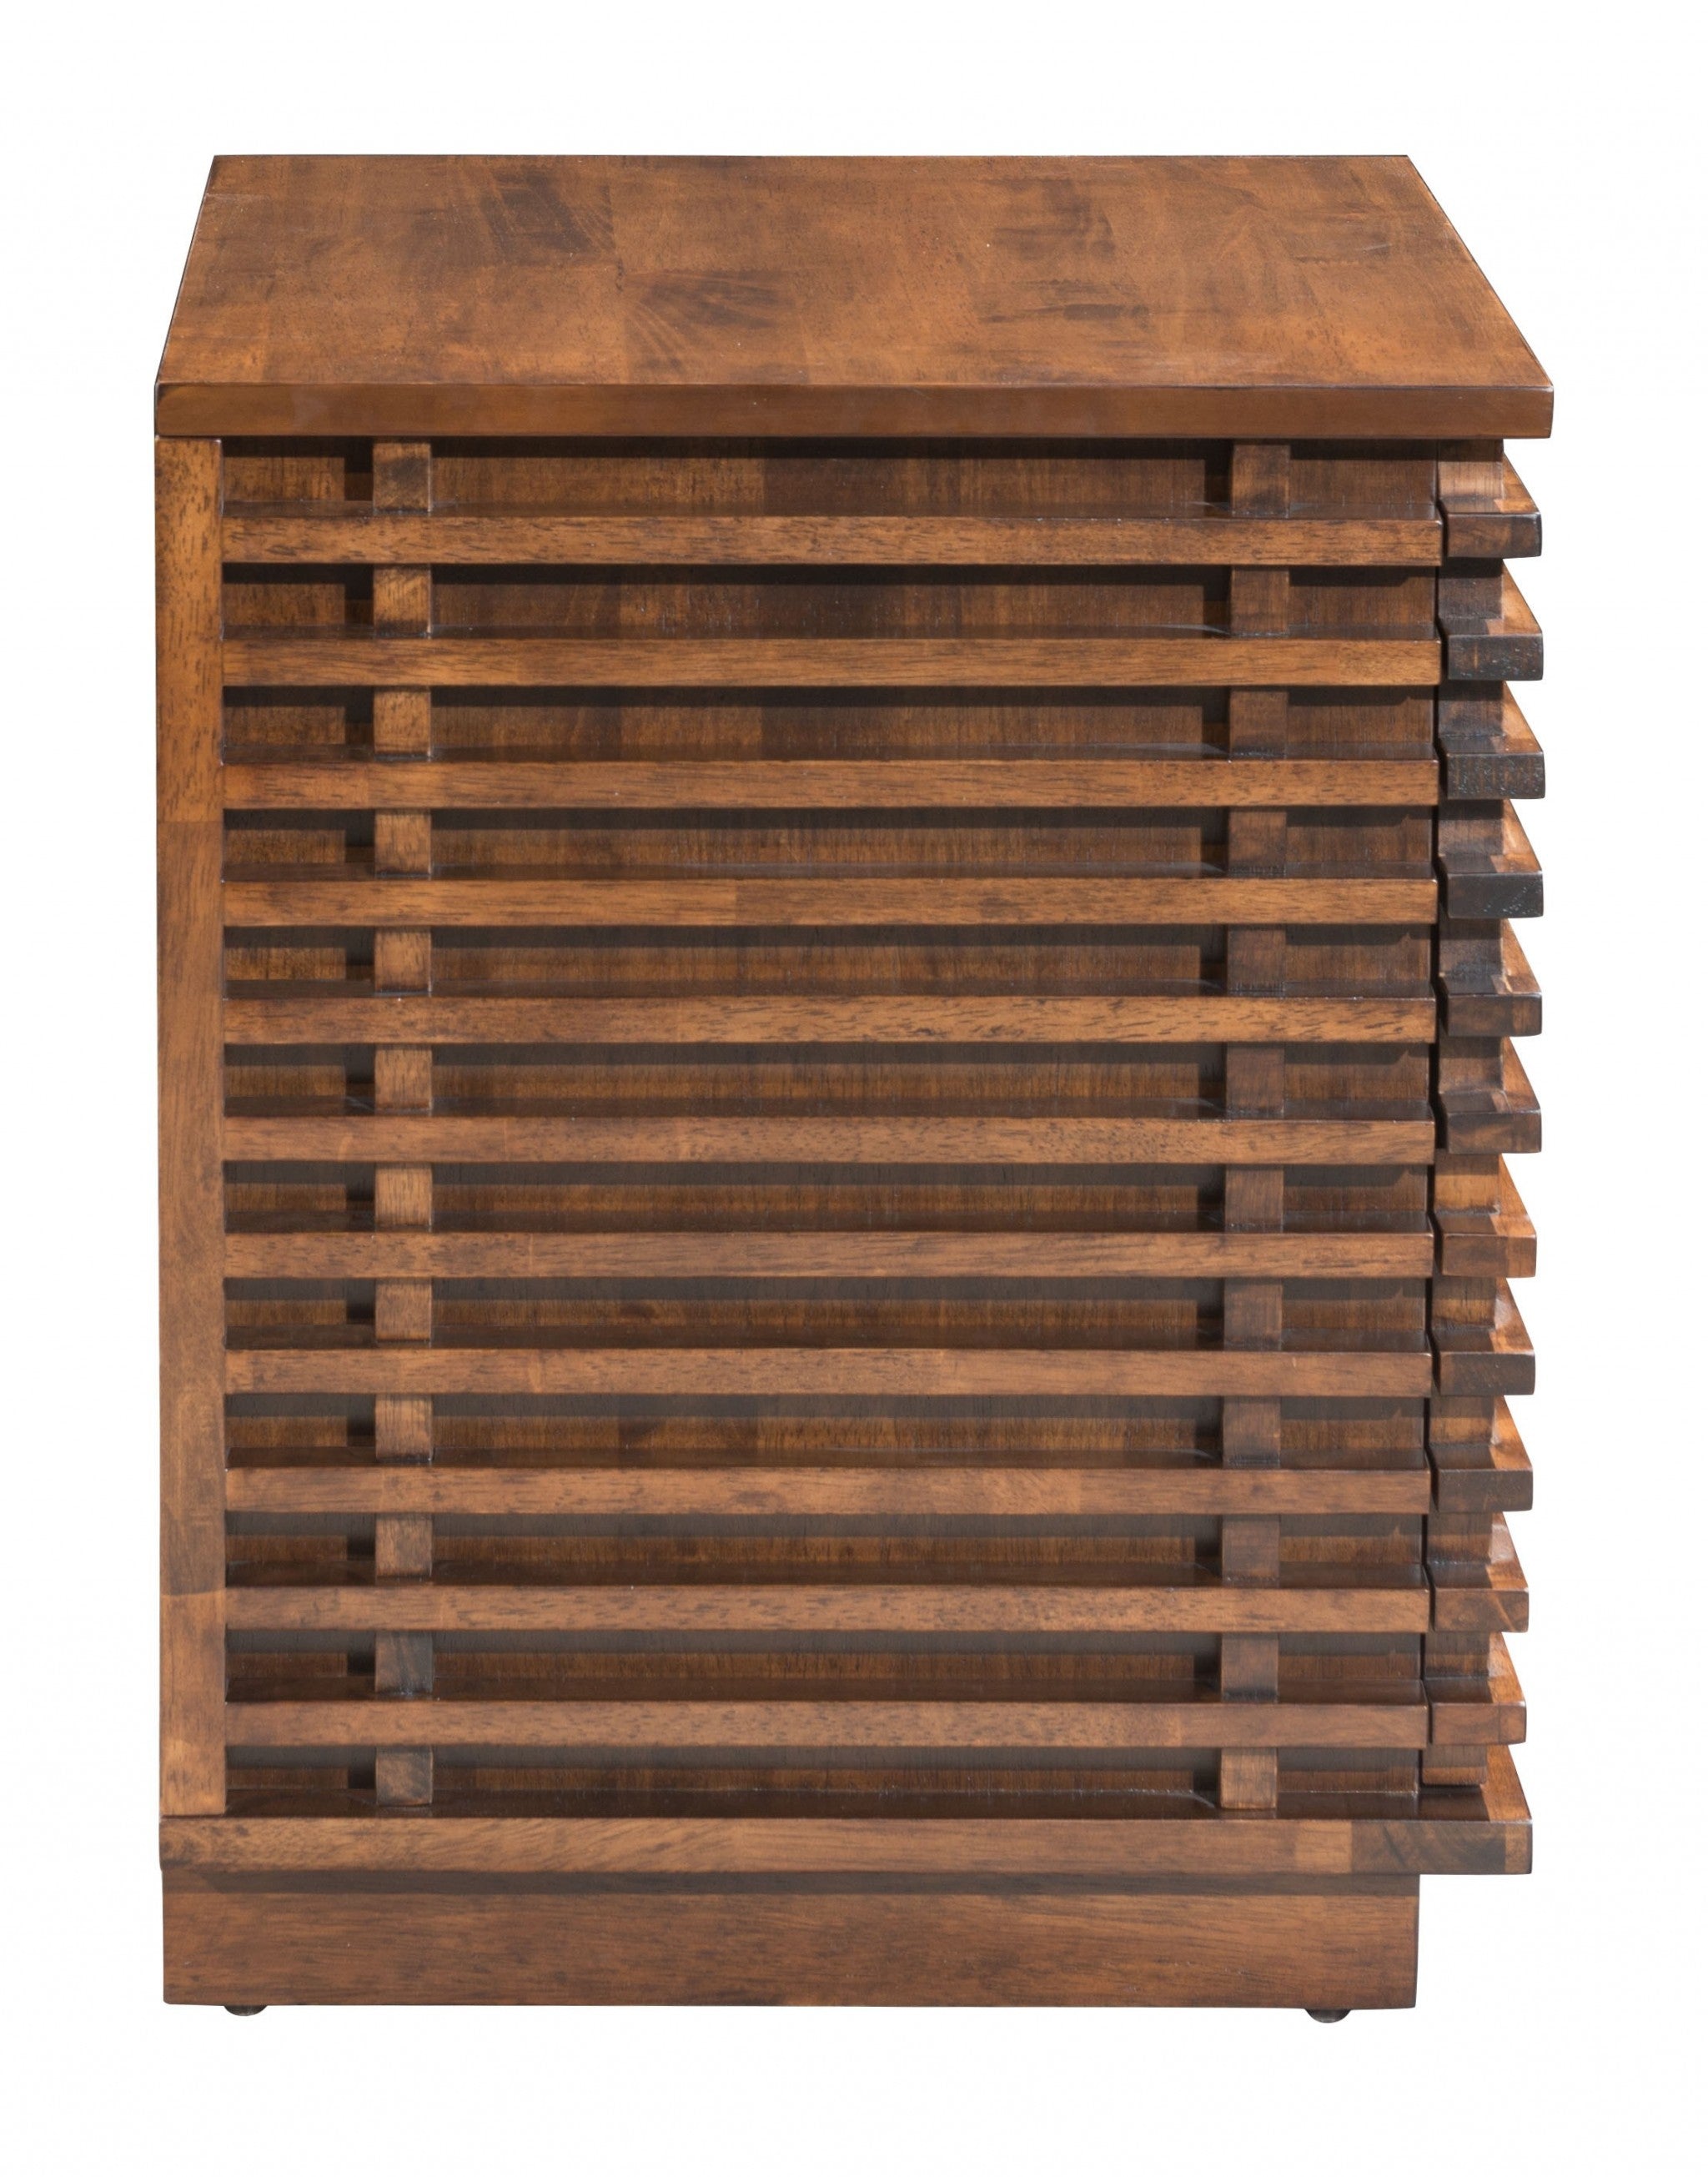 22" Walnut Solid Wood Modern Slat Design End Table with Drawers